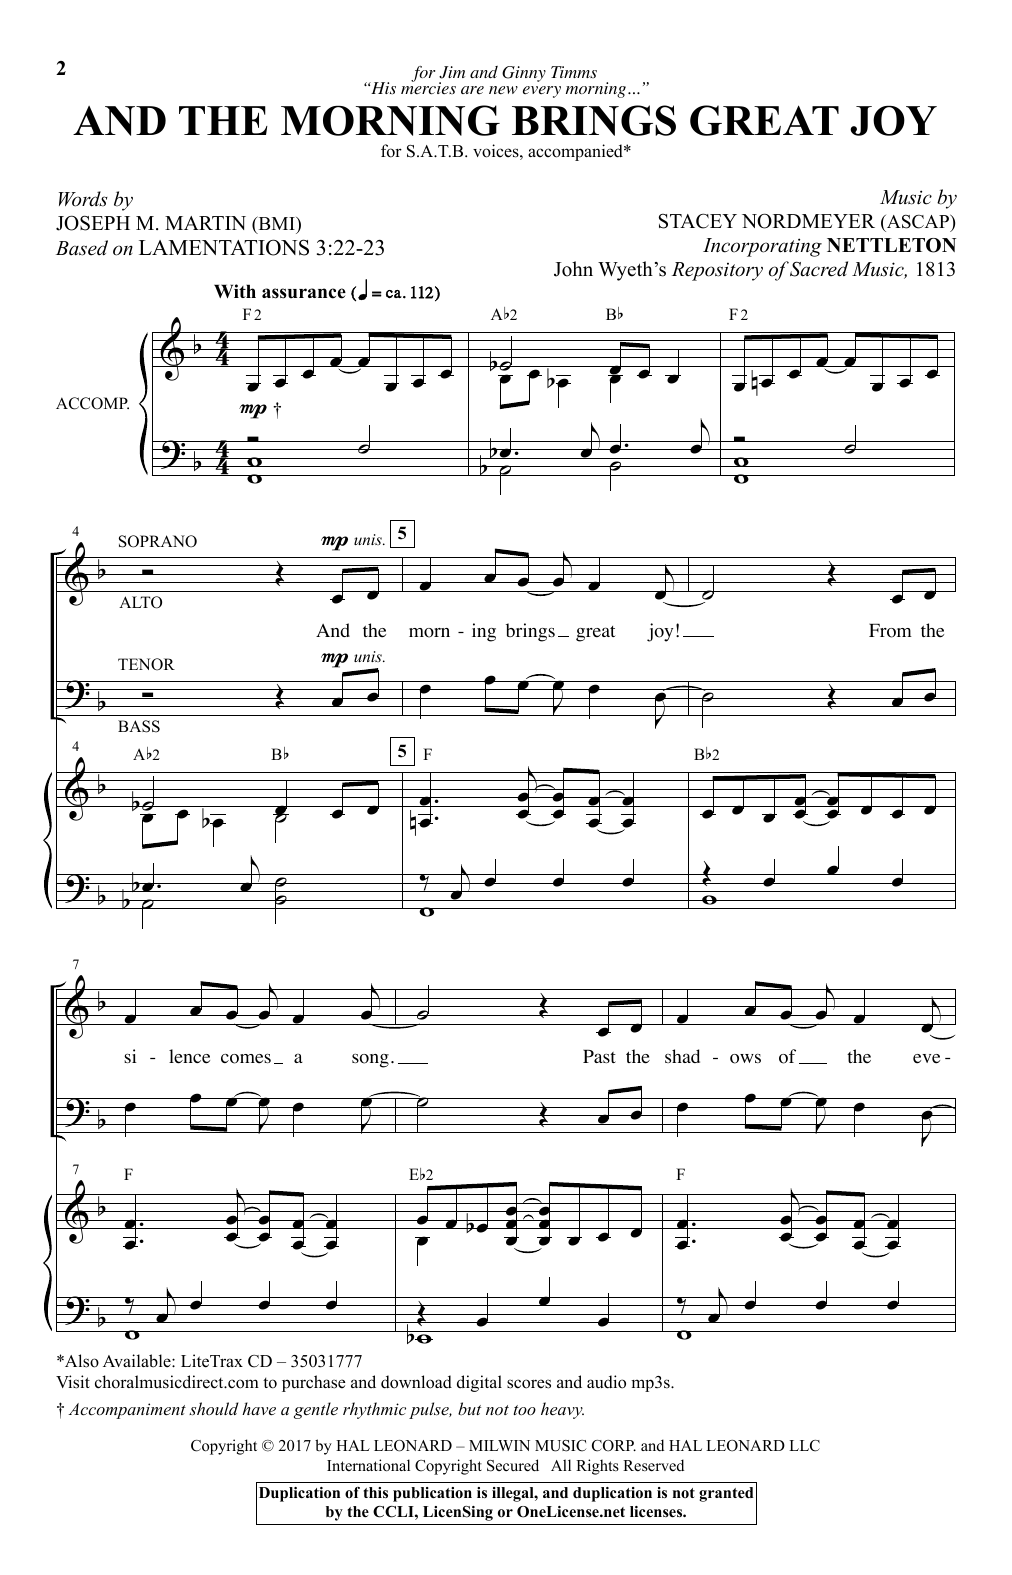 Download Stacey Nordmeyer And The Morning Brings Great Joy Sheet Music